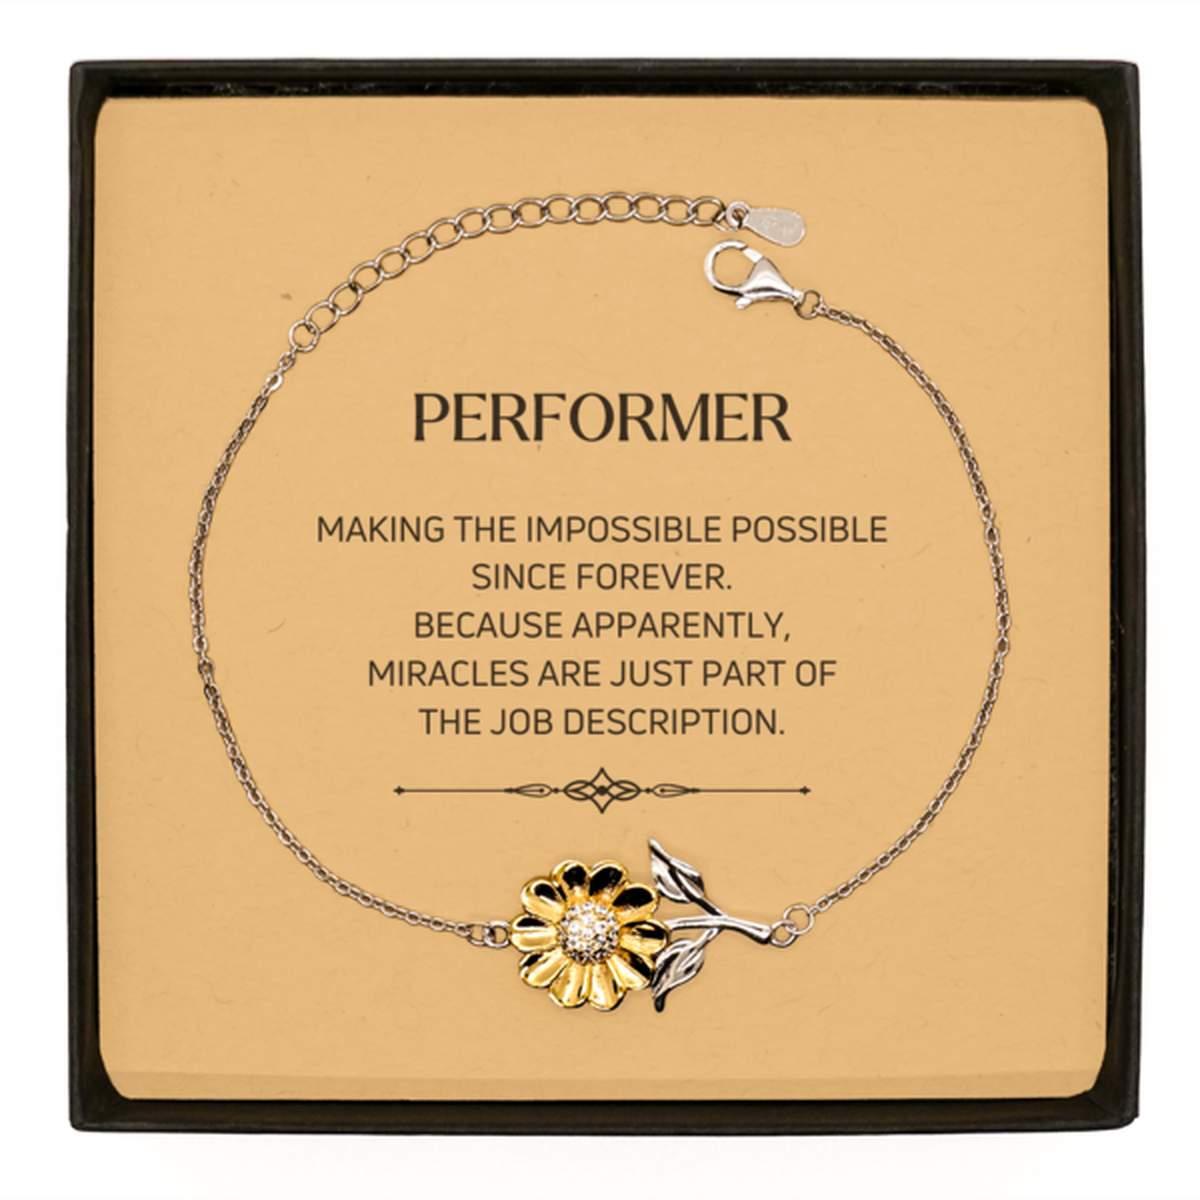 Funny Performer Gifts, Miracles are just part of the job description, Inspirational Birthday Sunflower Bracelet For Performer, Men, Women, Coworkers, Friends, Boss